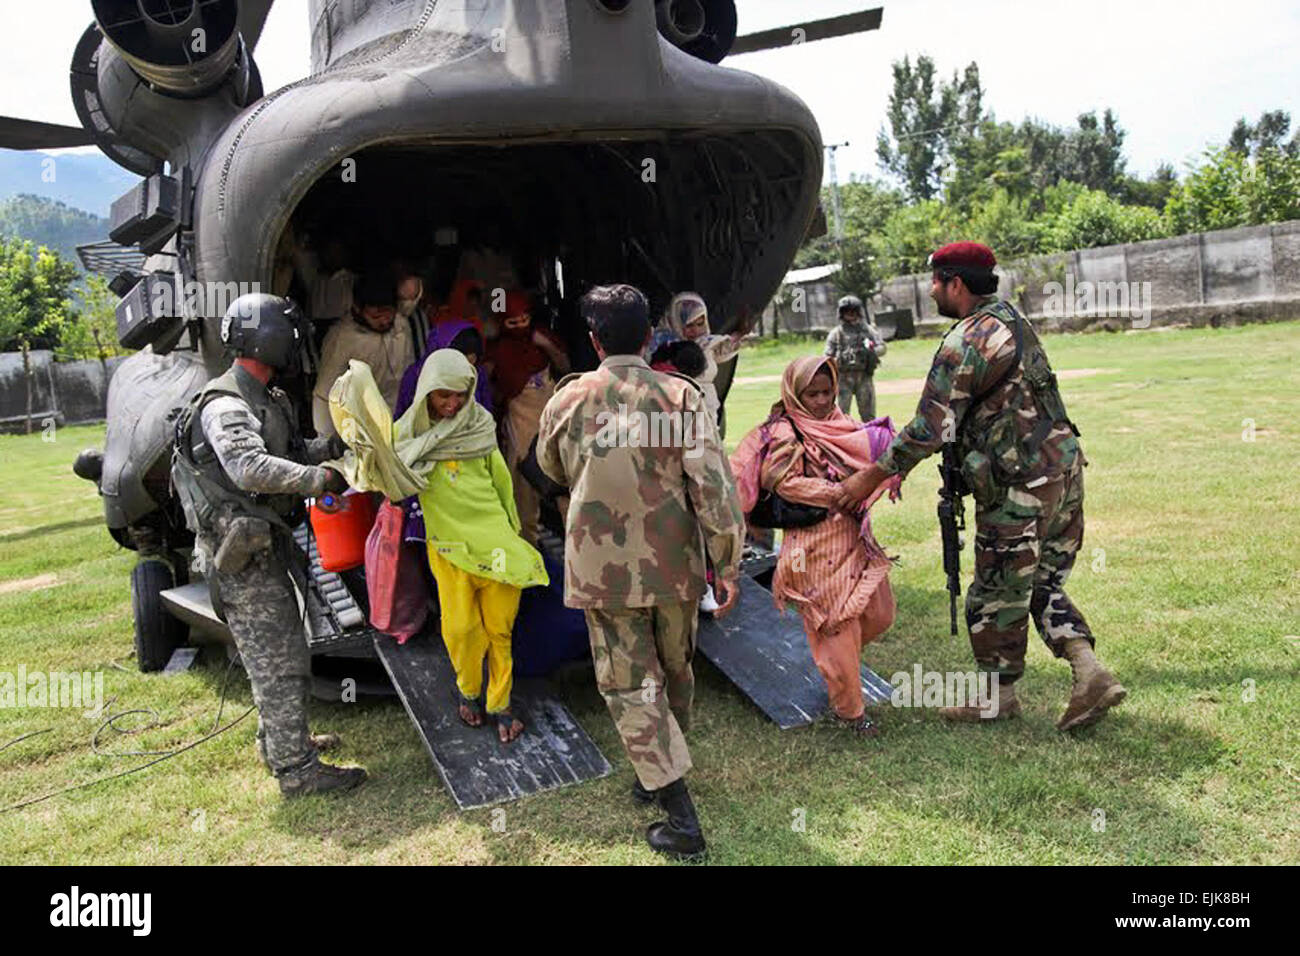 A U.S. Army soldier and Pakistani troops help Pakistani residents as they disembark from a U.S. Army helicopter in Khwazahkela, Pakistan, as part of relief efforts to help flood victims, Aug. 5, 2010. Recent heavy rains forced thousands of residents to flee rising flood waters. U.S. forces have partnered with the Pakistani military to coordinate evacuation and relief efforts.  Staff Sgt. Horace Murray Stock Photo